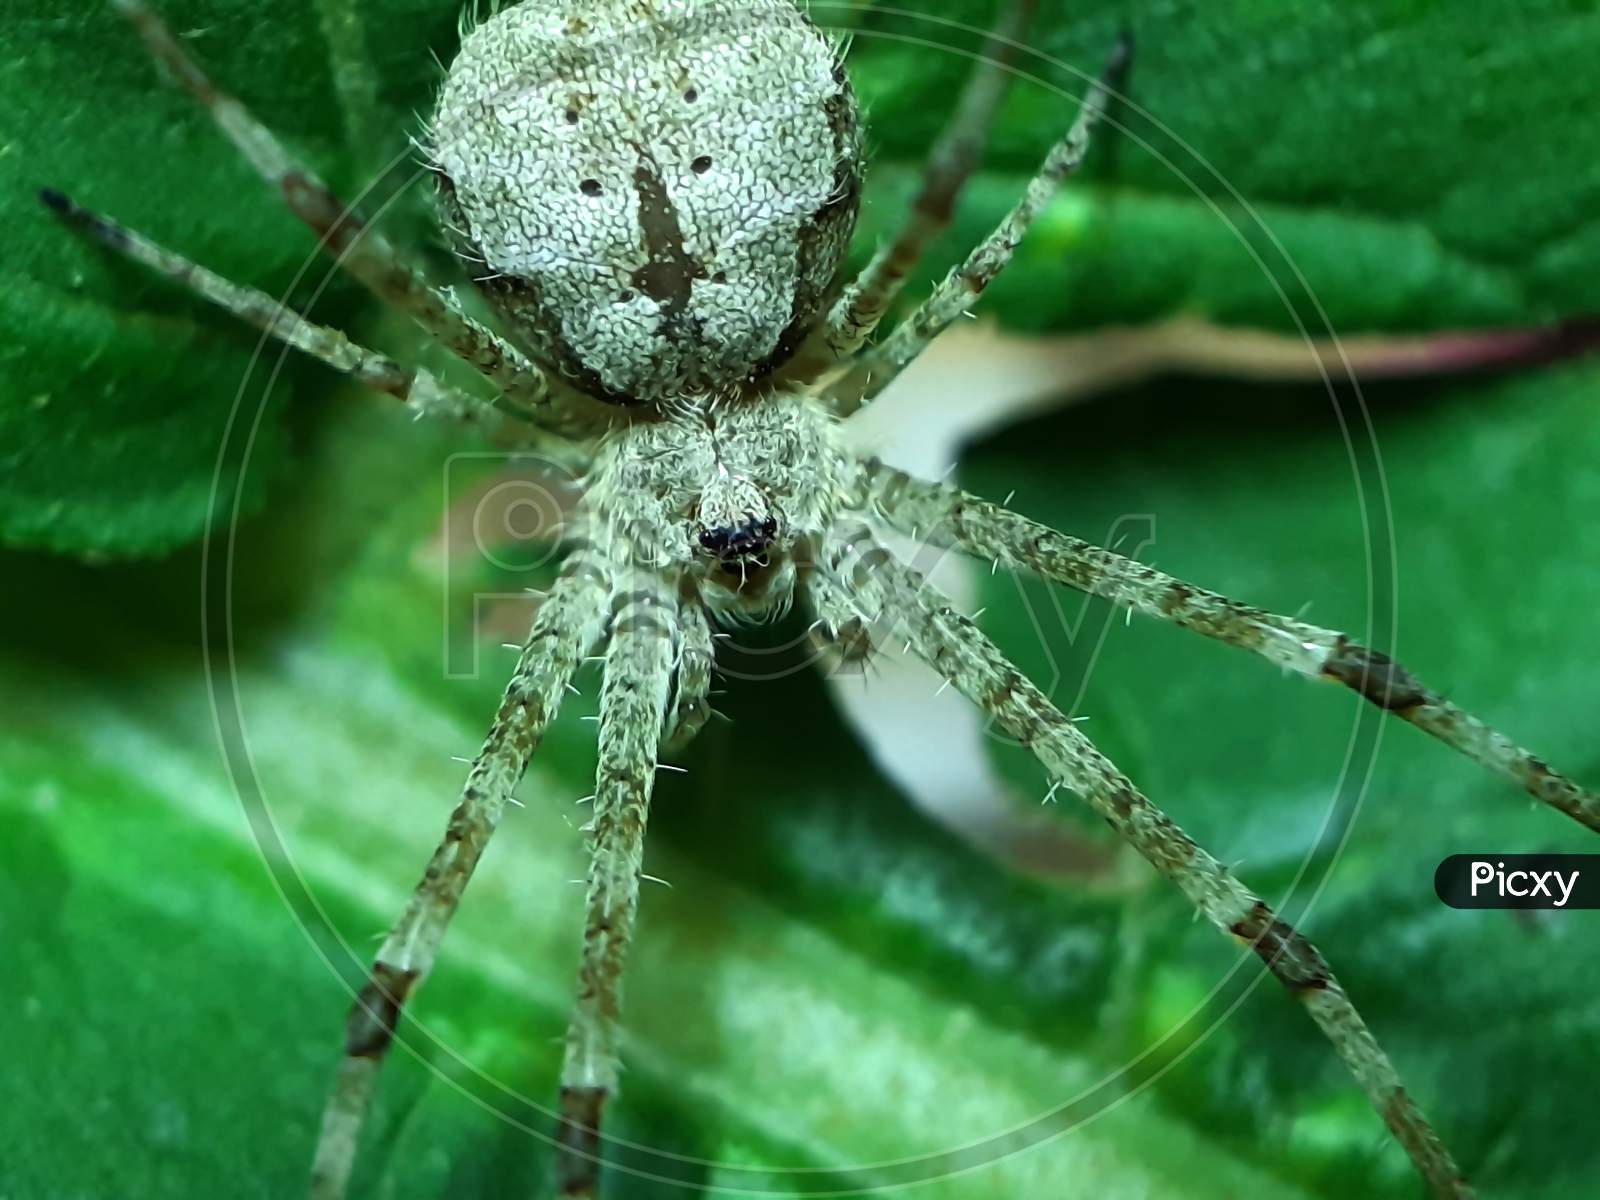 The White Spider Is Sitting On The Green Leaves And The Light Is Shining On It.